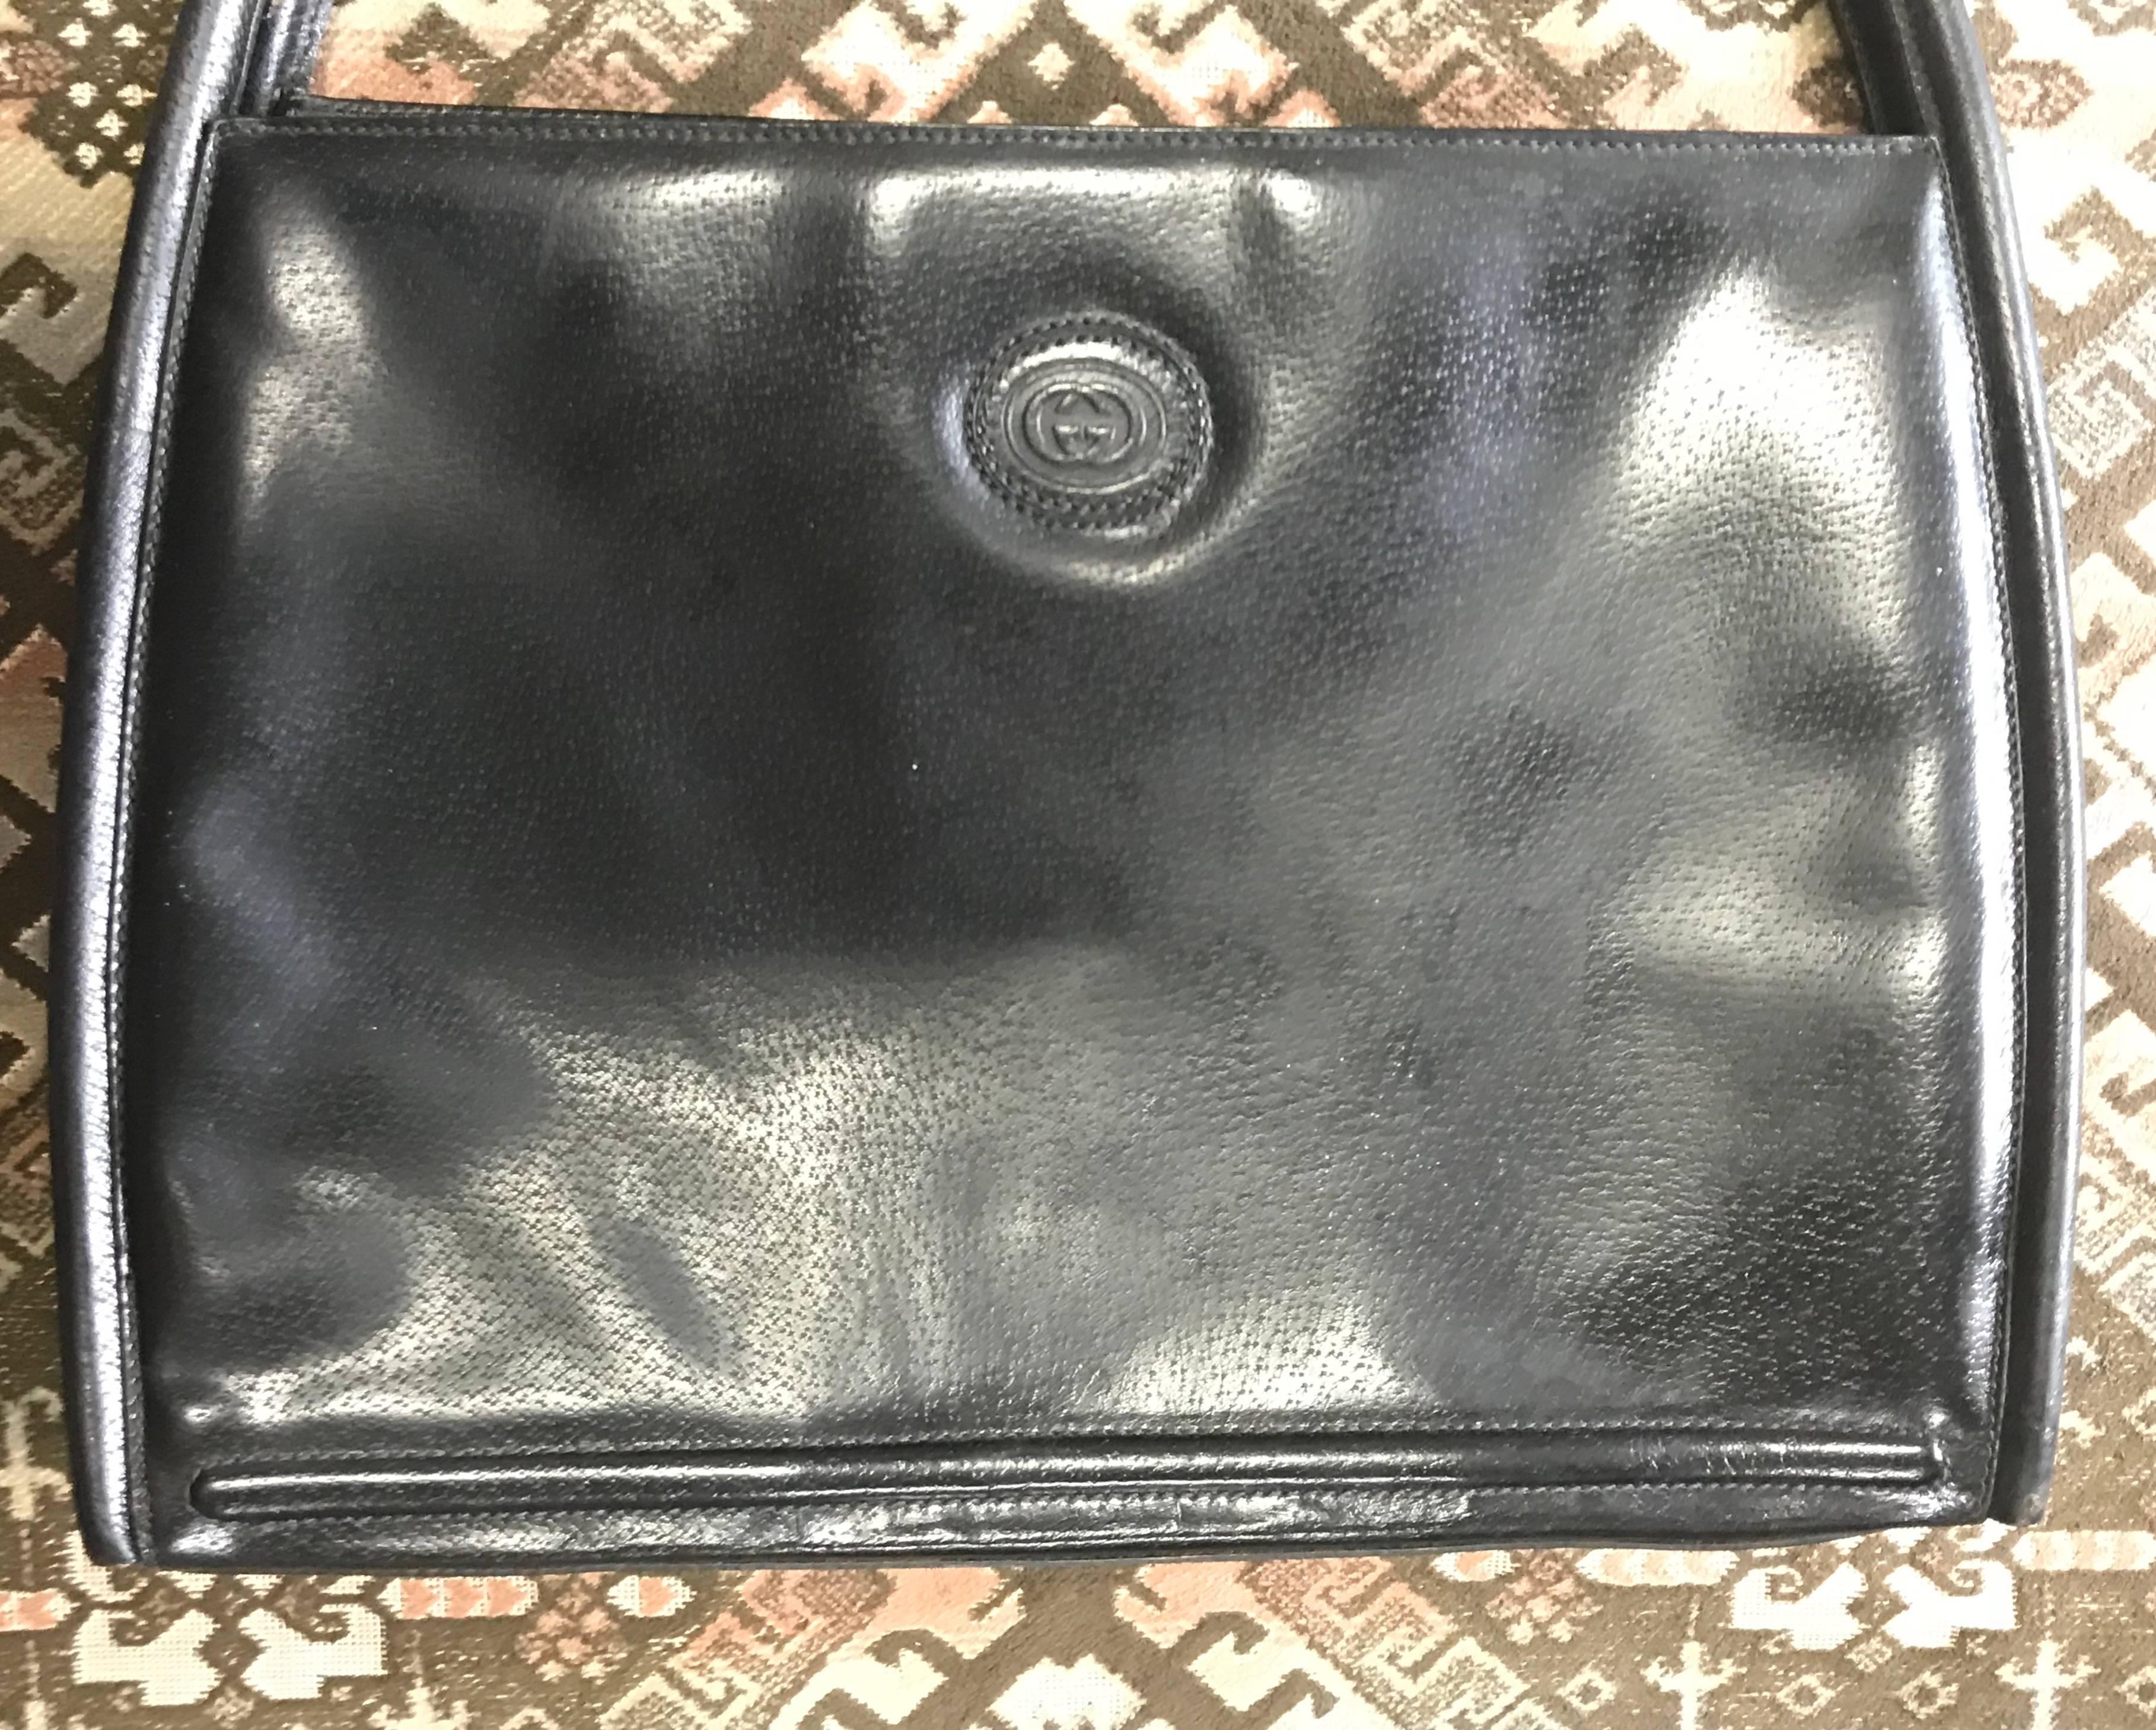 1980s. Vintage Gucci black pigskin large trapezoid shape shoulder bag with embossed GG mark. Classic leather purse for daily use.


Here is another classic and modest piece from GUCCI back in the 80's. Genuine pigskin black shoulder bag in unique